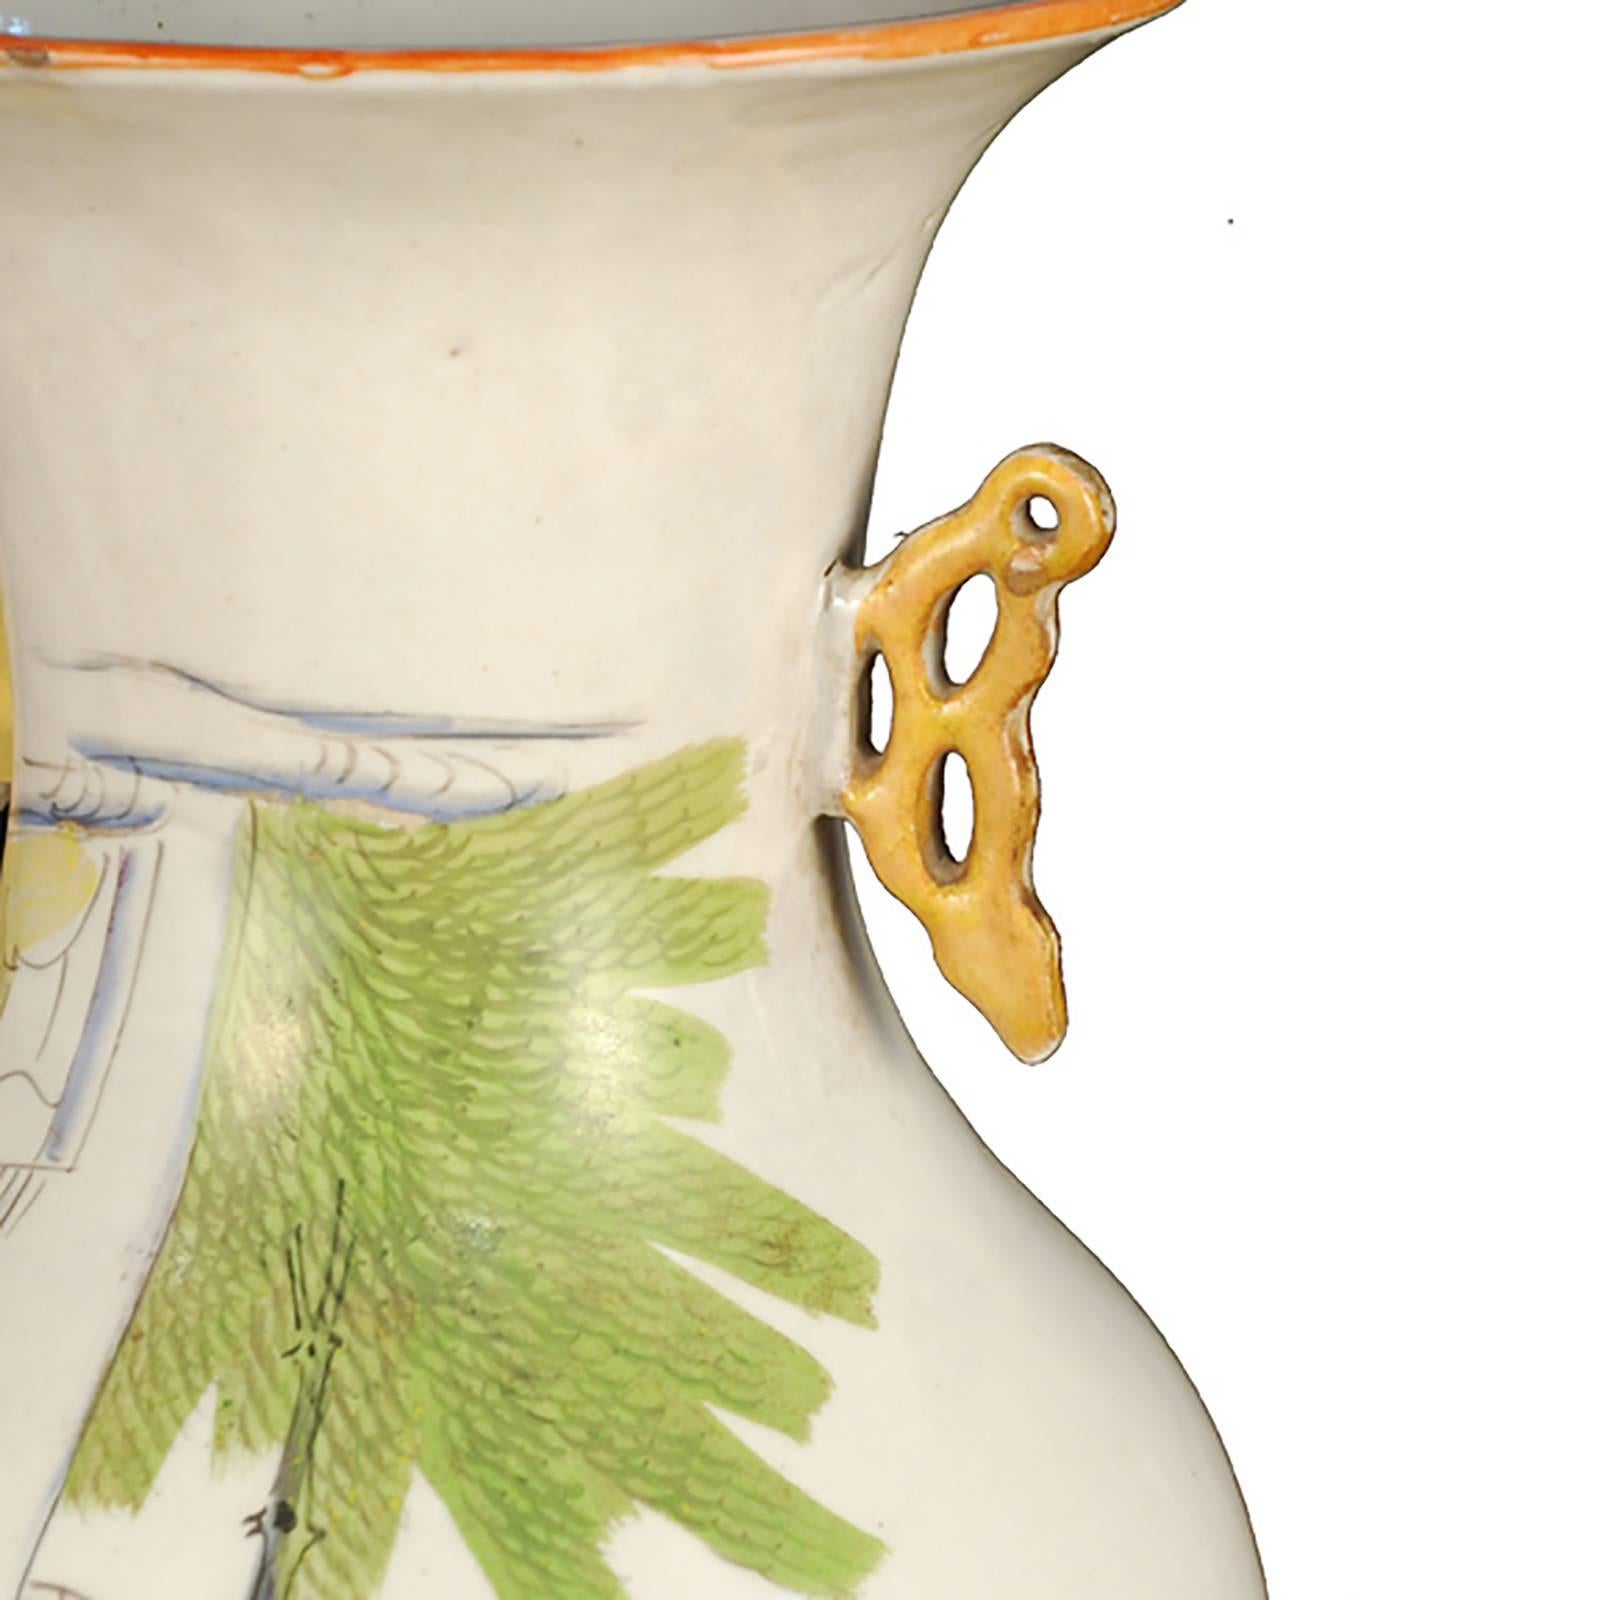 The form of this porcelain vase is called "phoenix tail" because of the way its flared mouth and slender waist mimic the shape of the bird. This shape gained popularity during the Qing dynasty. Its hand-painted vibrant landscape offers a